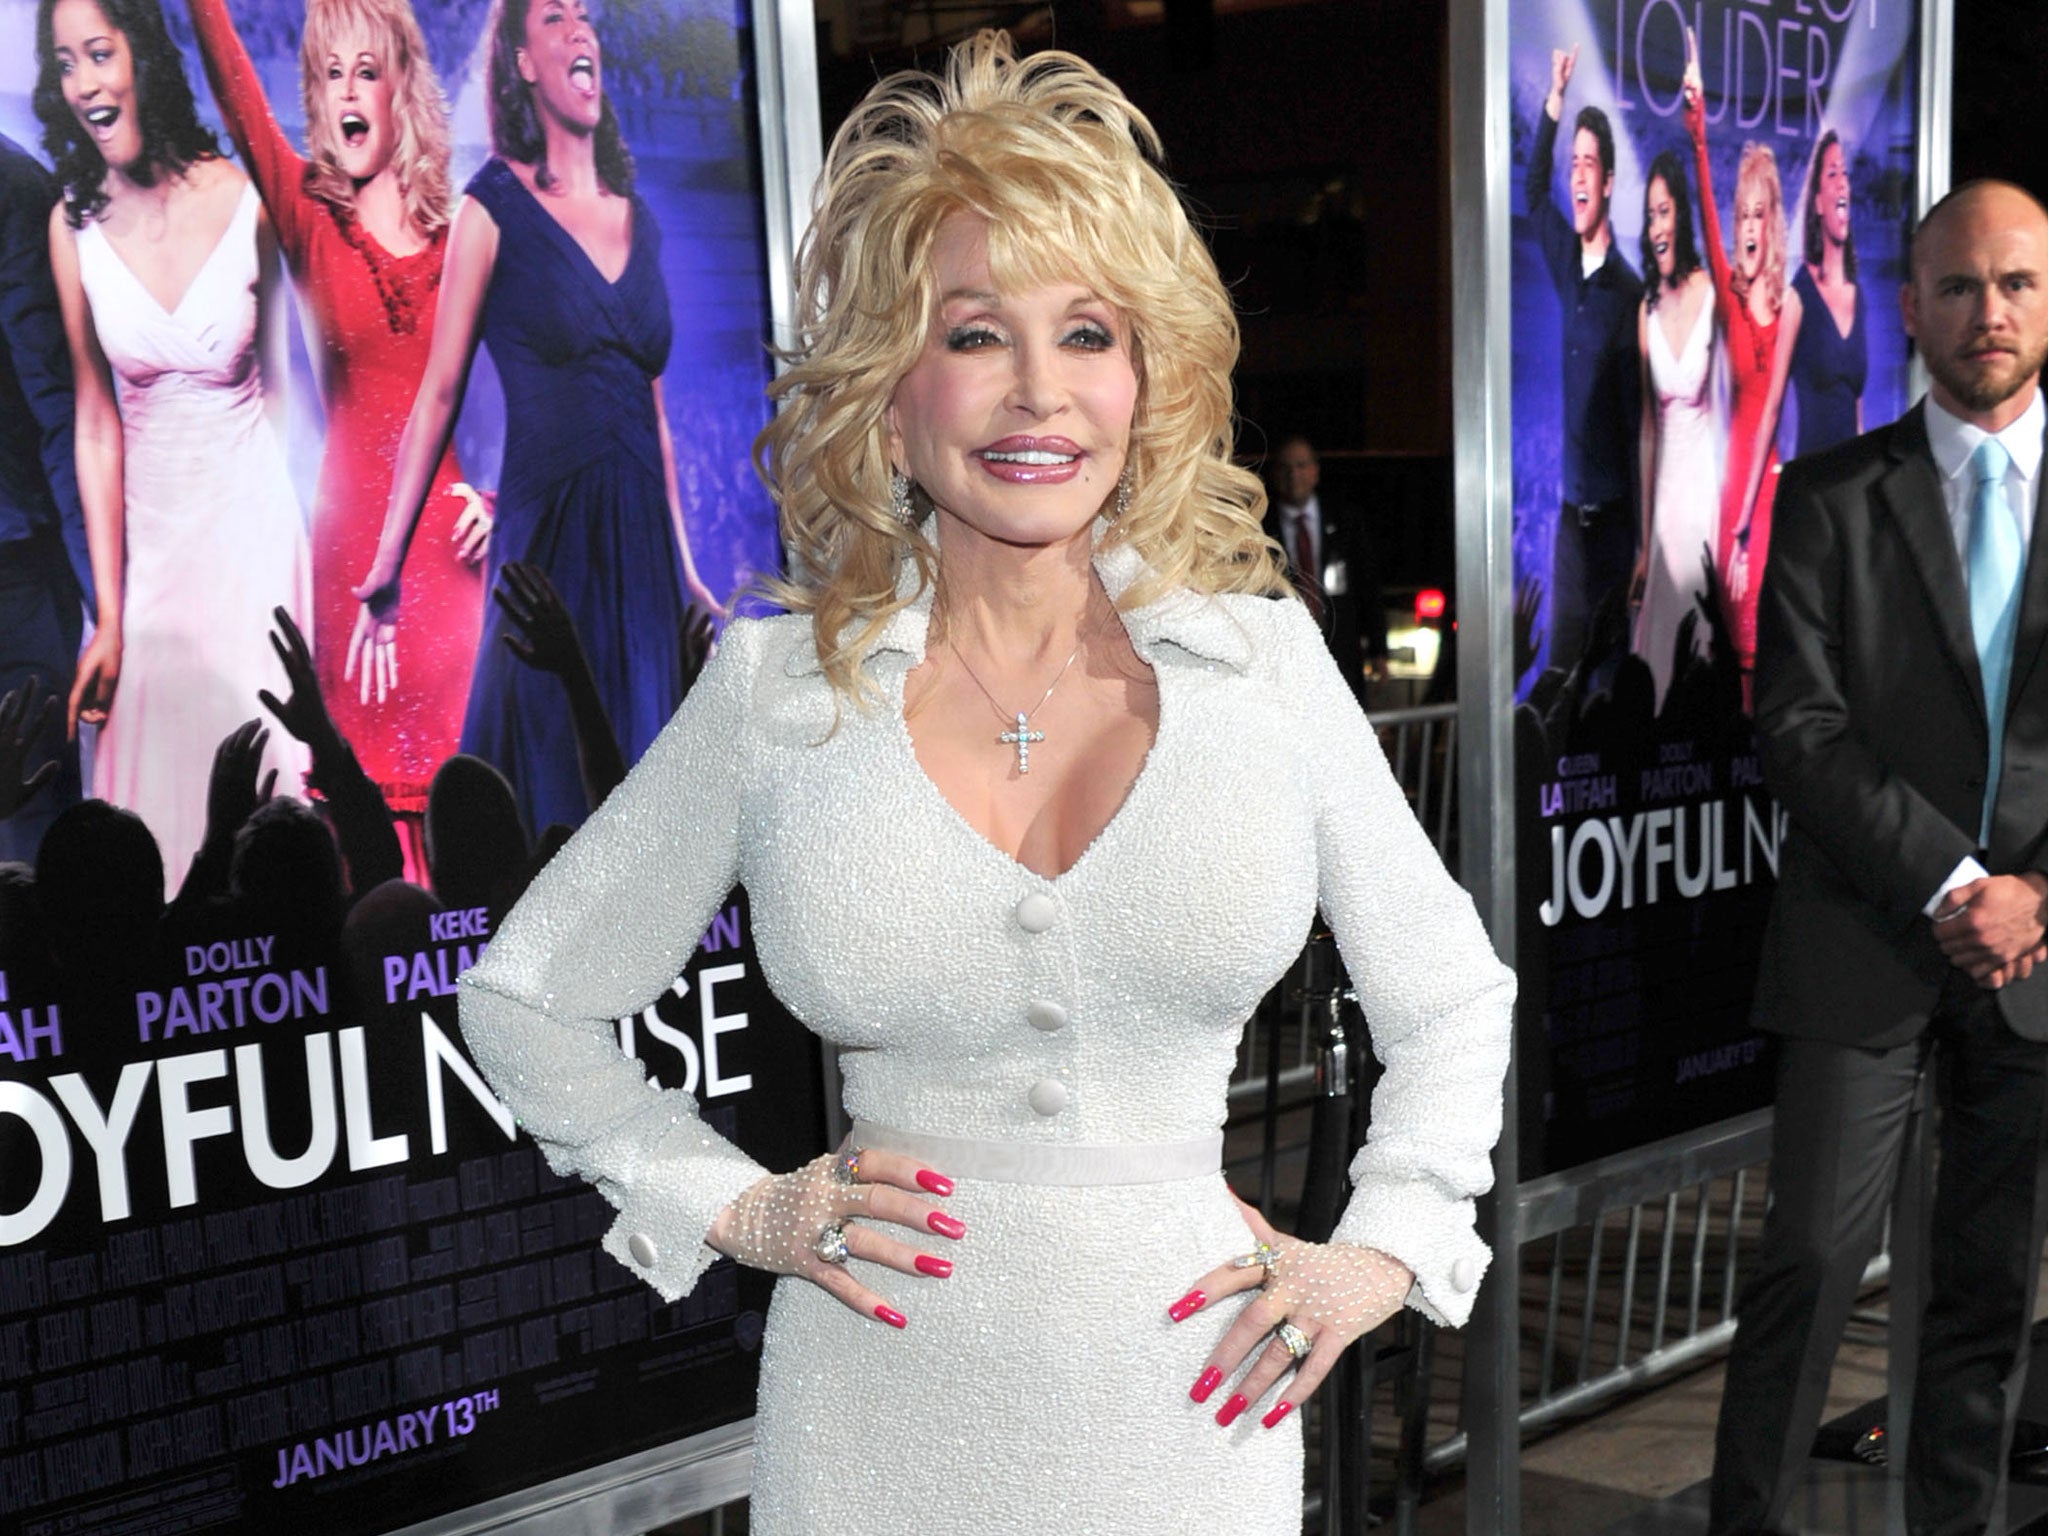 Dolly Parton, Country singer